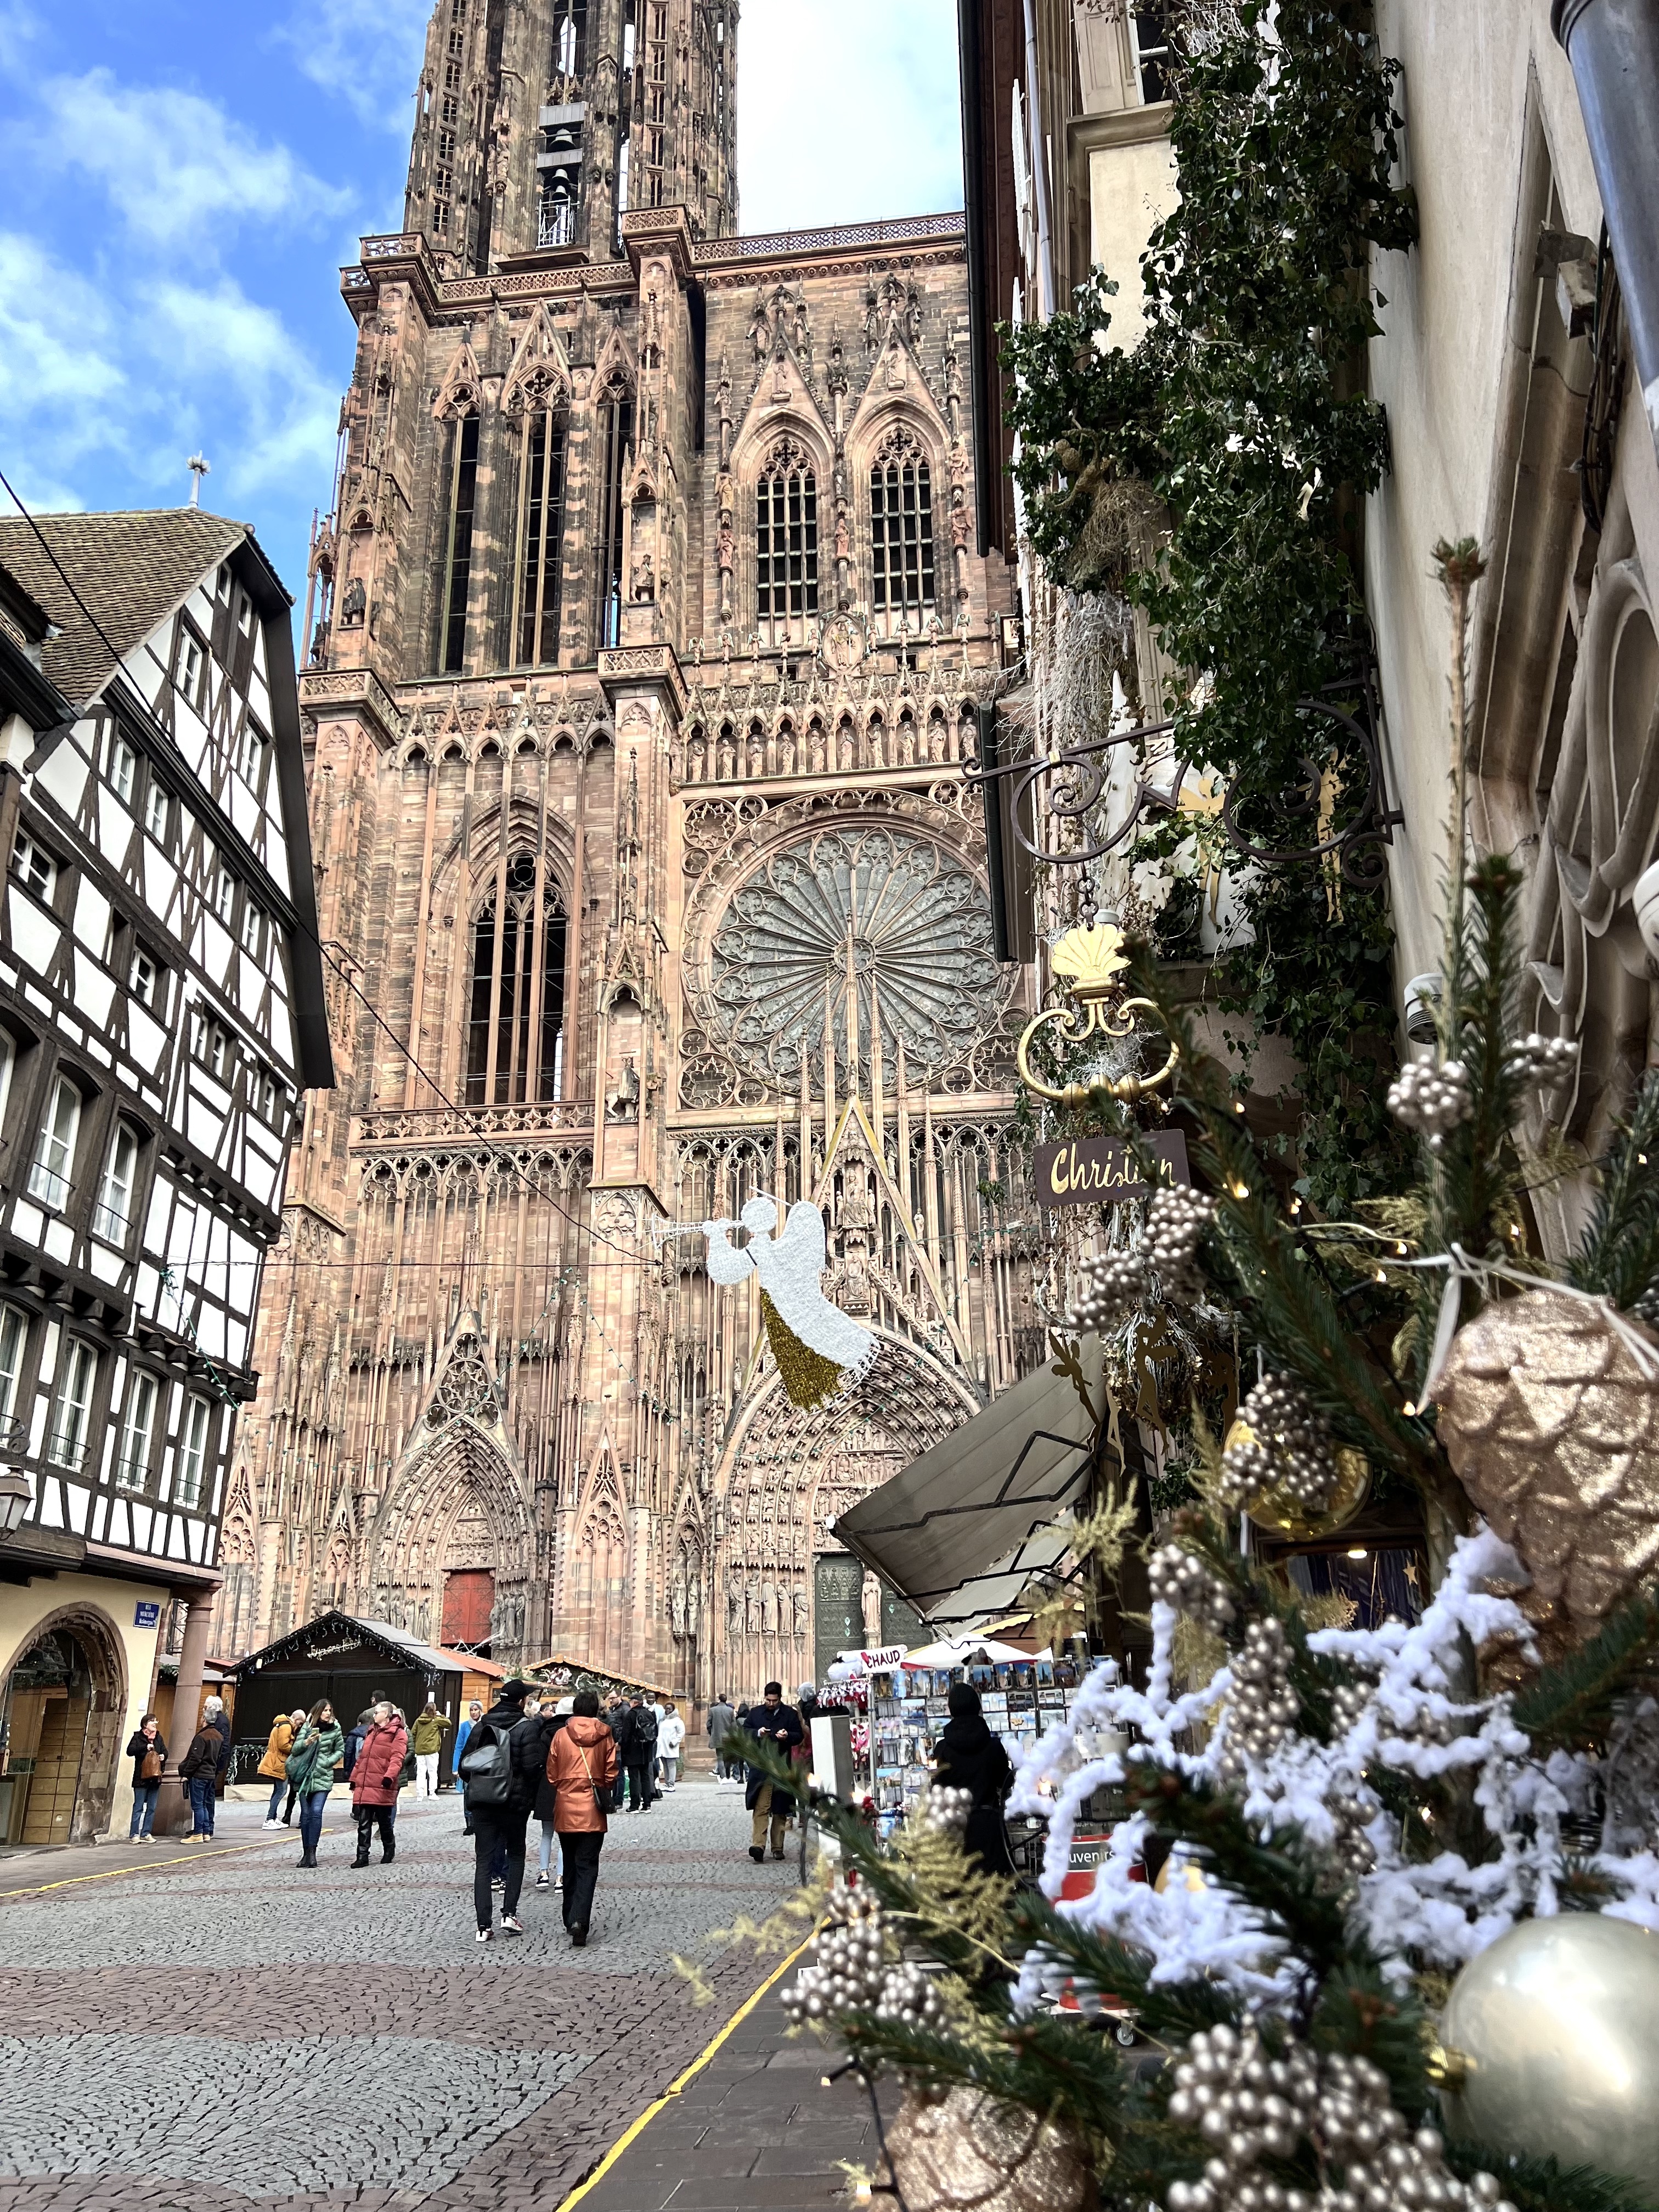 The view over Strasbourg Cathedral, on the opening day of the Christmas Market